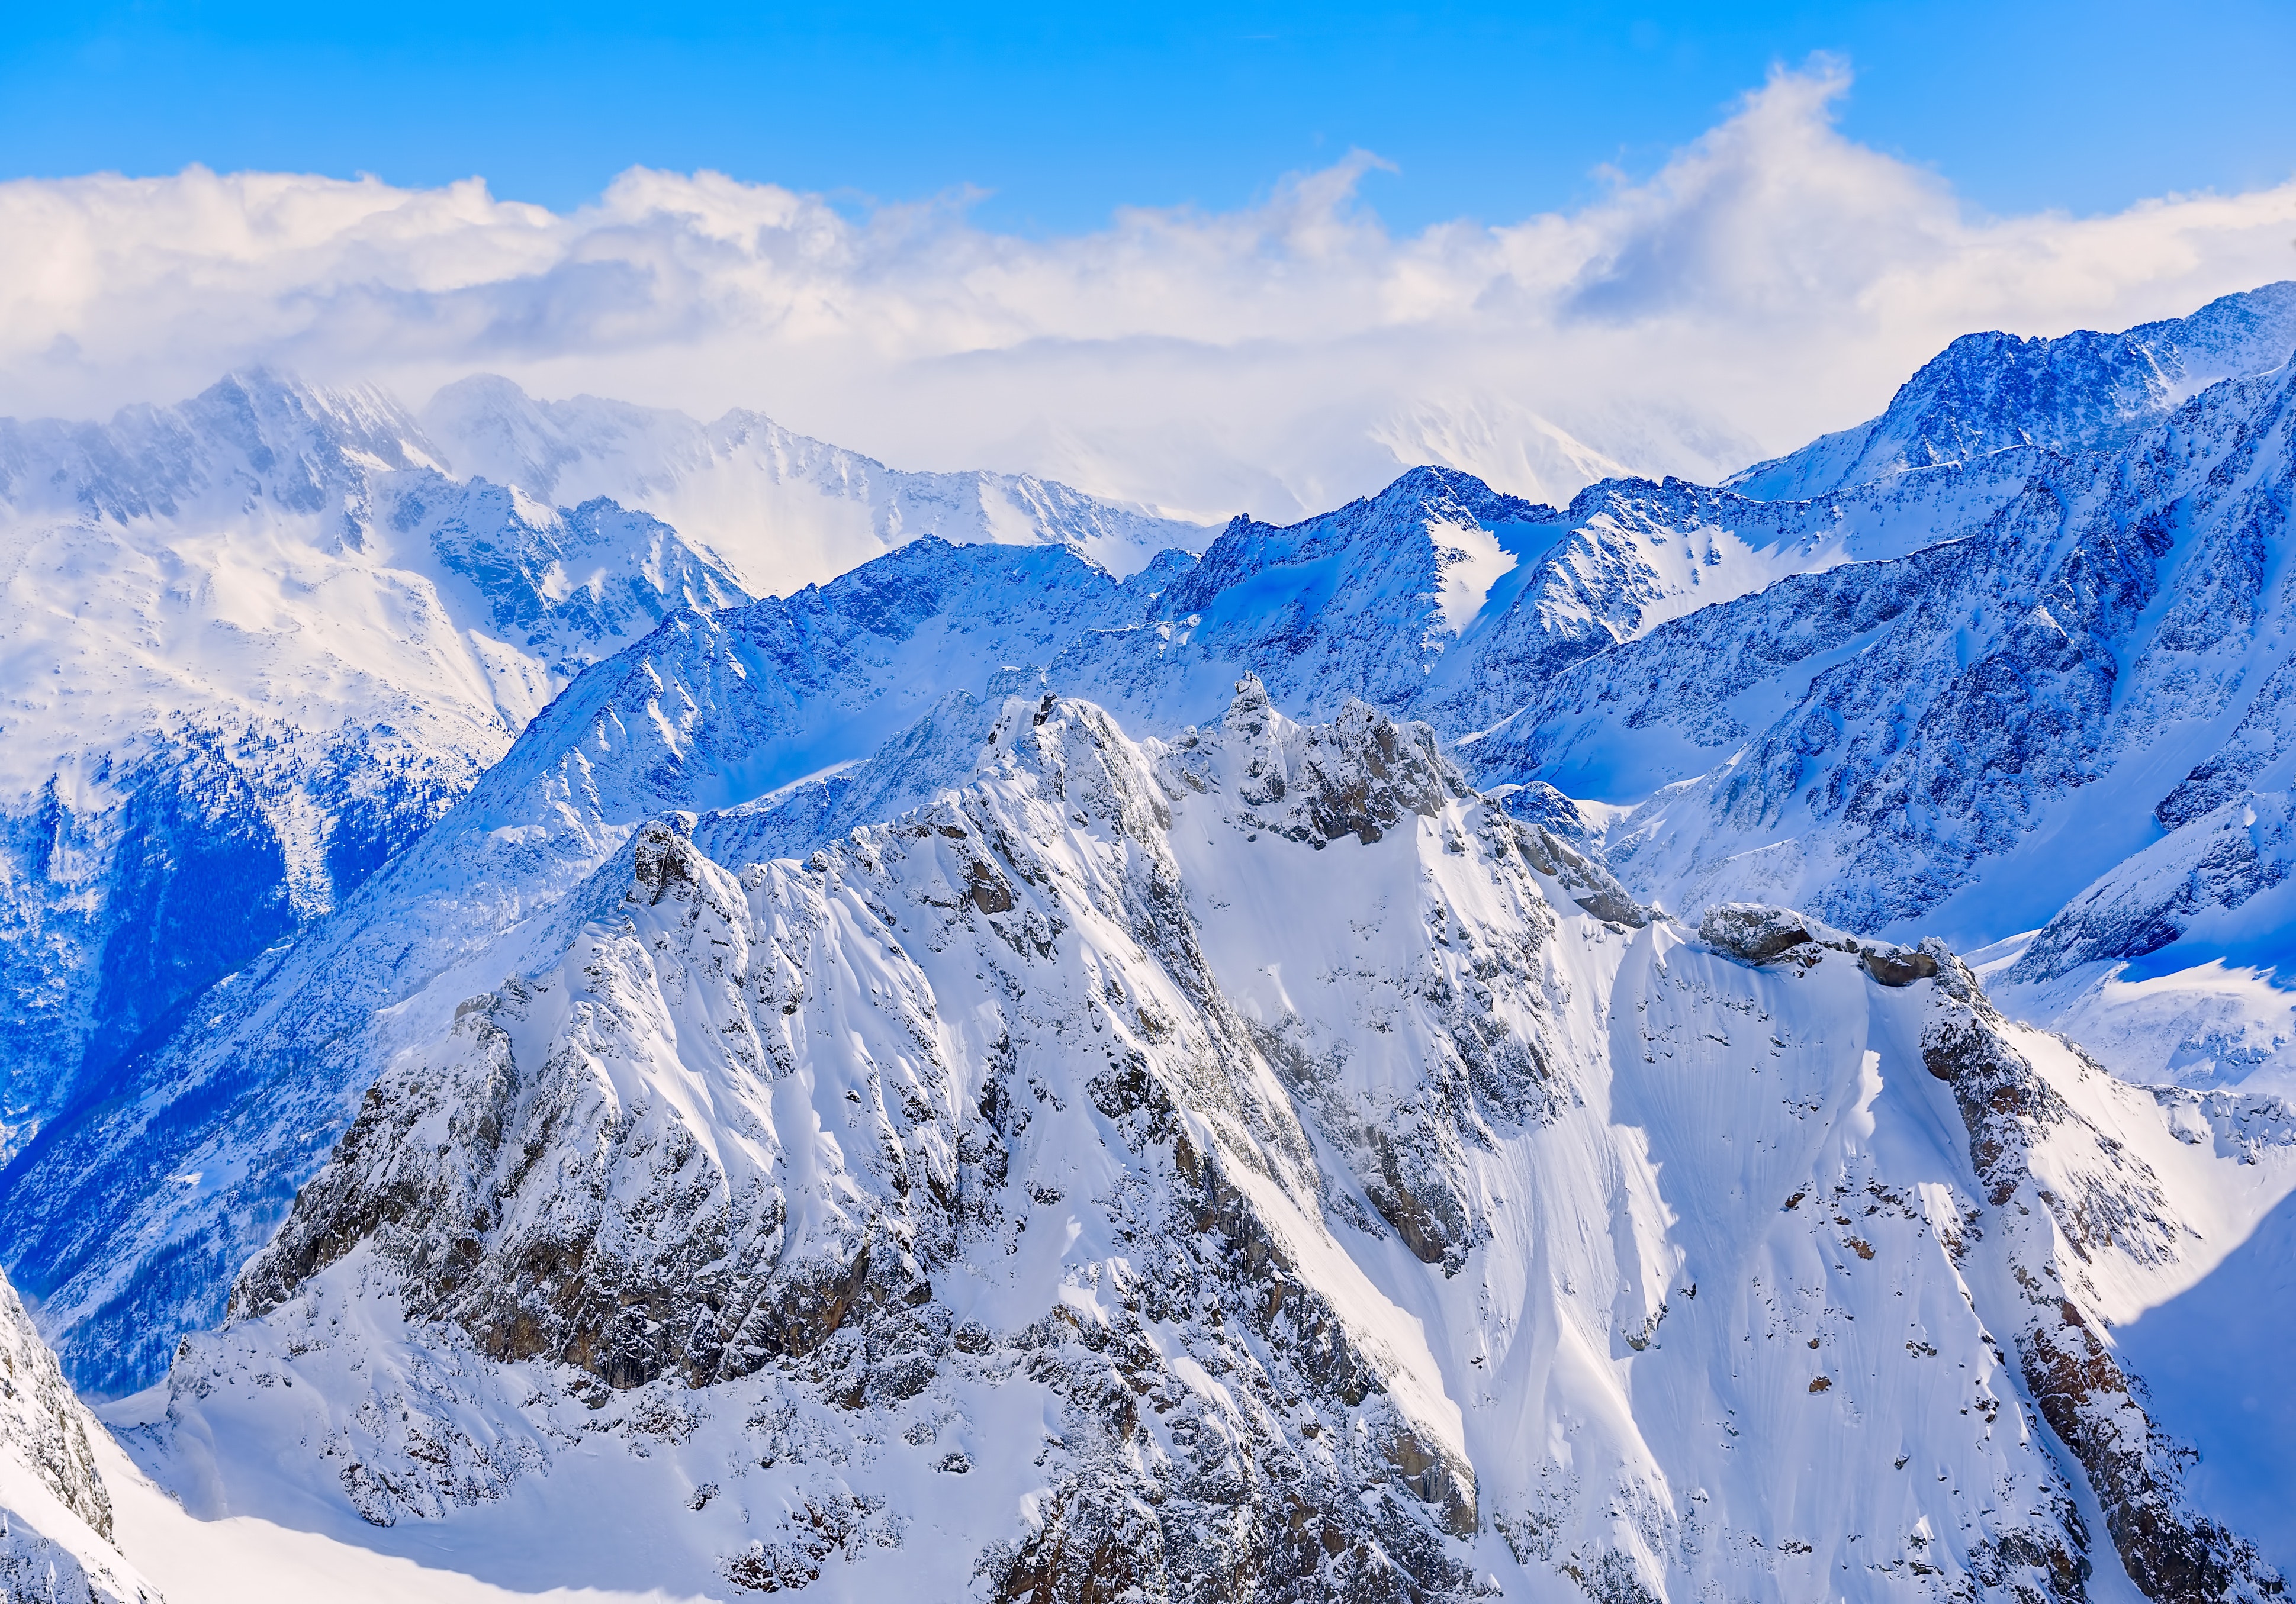 Mountain ranges covered in snow photo